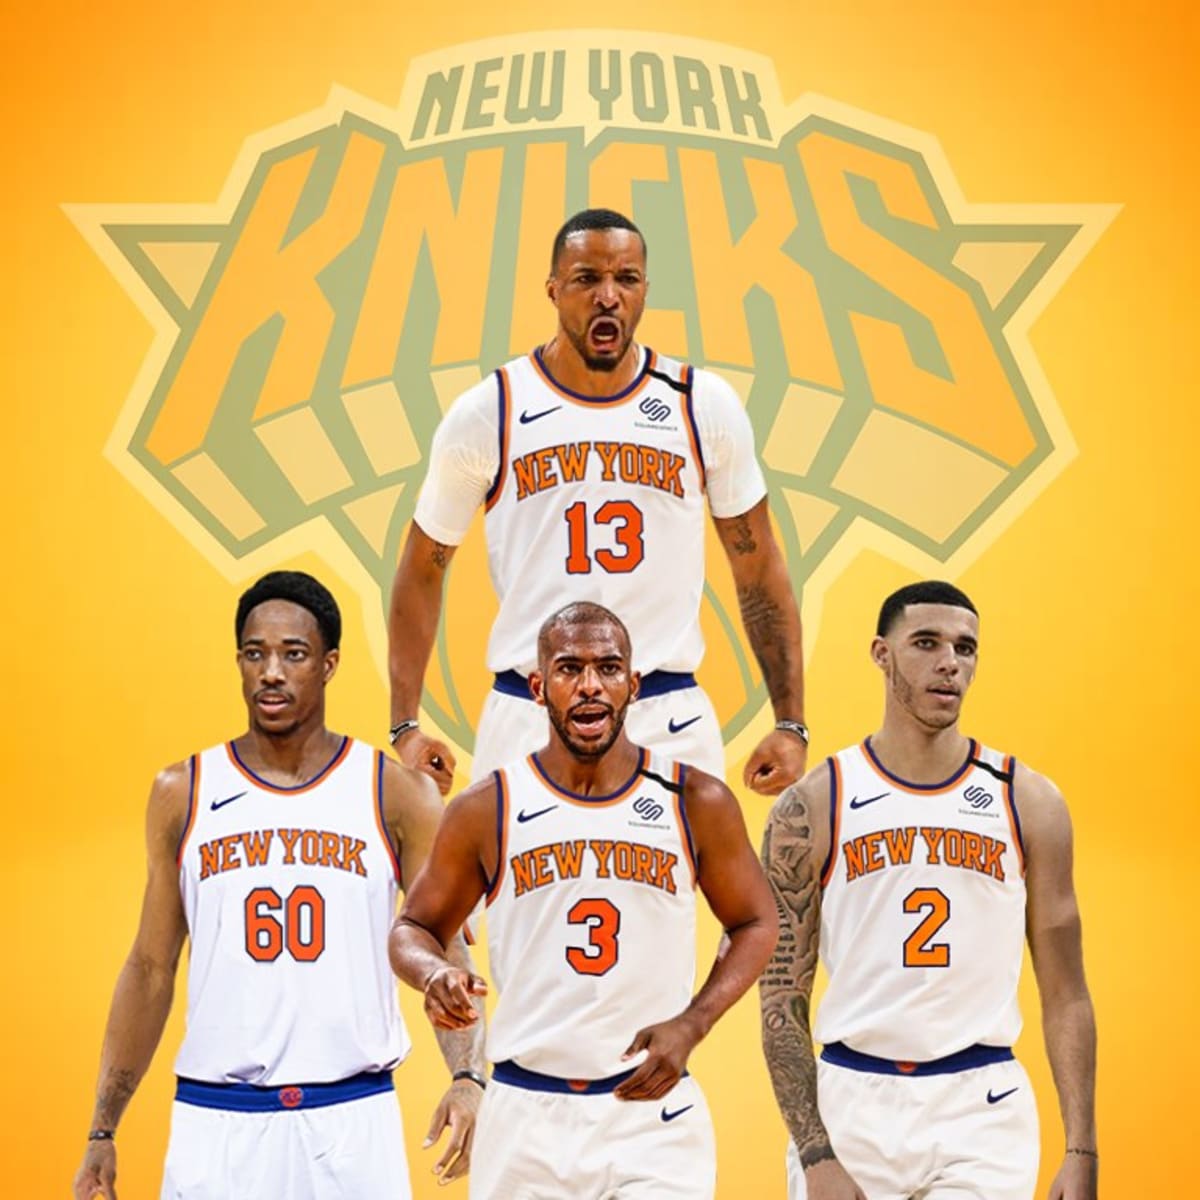 NBA Rumors: Knicks Are A Hot Free Agent Destination, Could Sign